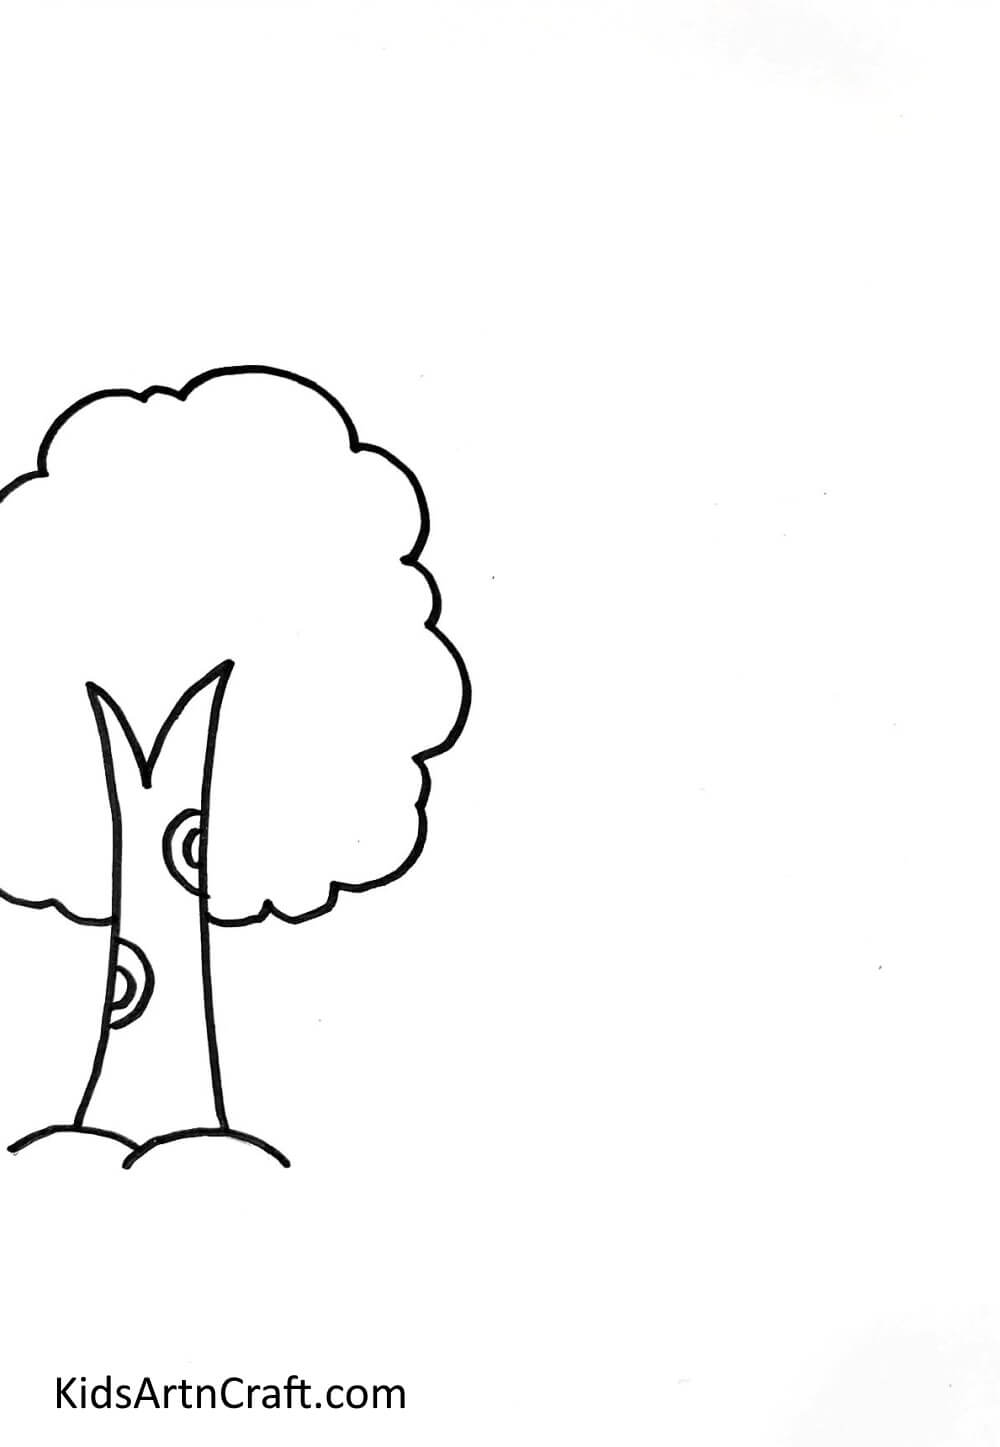 Drawing A Tree How to draw a home, tree, and landscape scene step by step